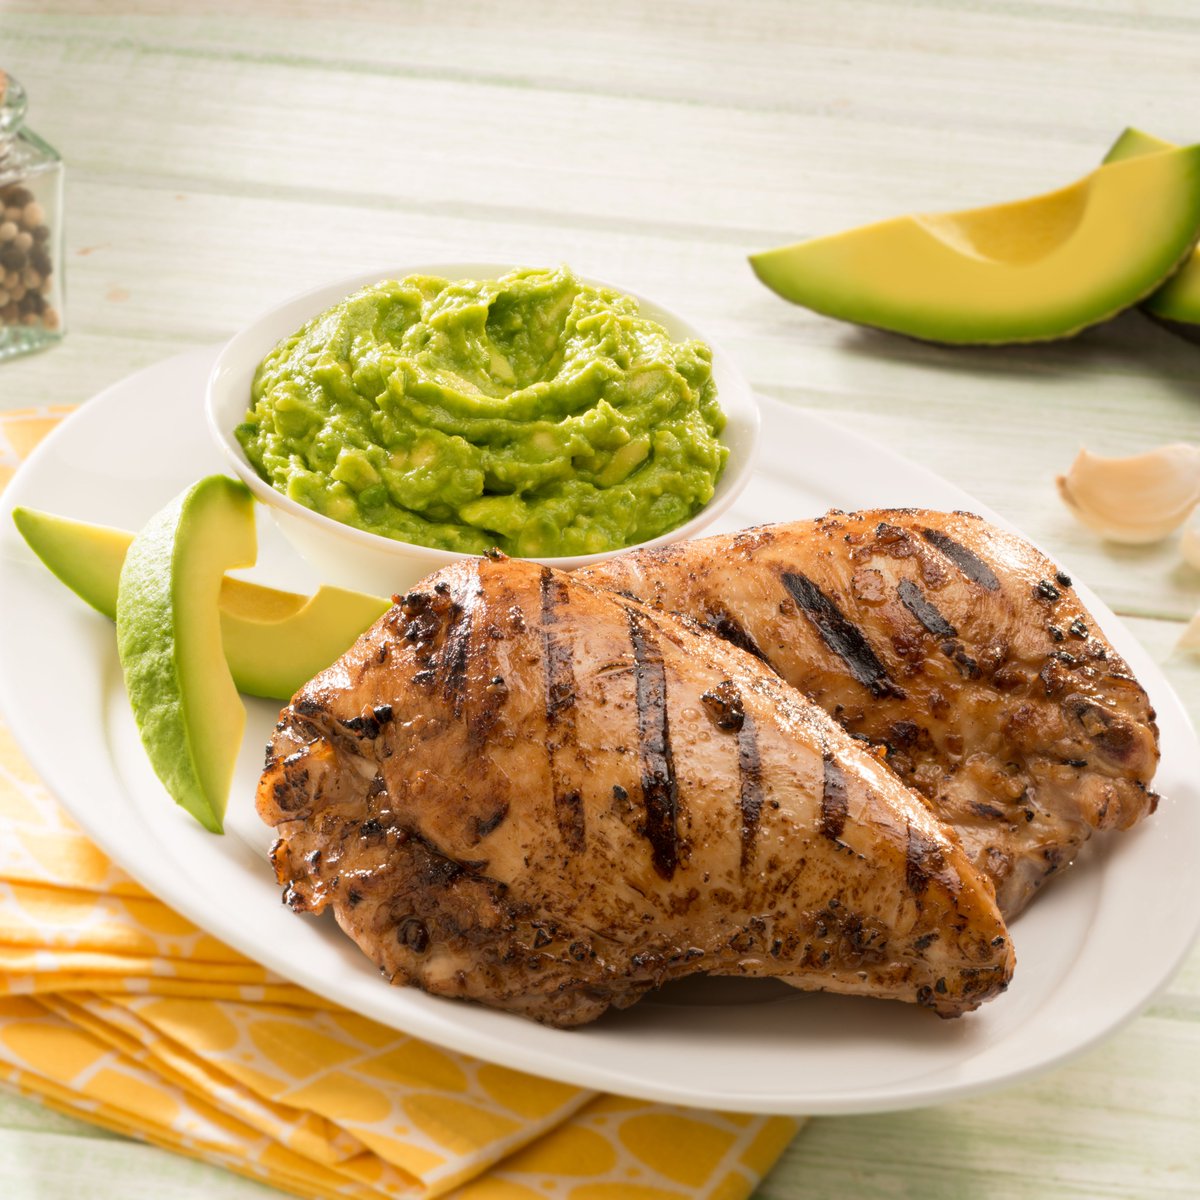 It’s grilling season 🤤 As always, Avocados From Mexico® has got your back with grilling recipes that are #AlwaysGood! Add this Grilled Chicken in Chile Serrano with Avocado Sauce to your summer chicken recipes – we promise it’s as good as it looks and sounds 😋 Recipe link